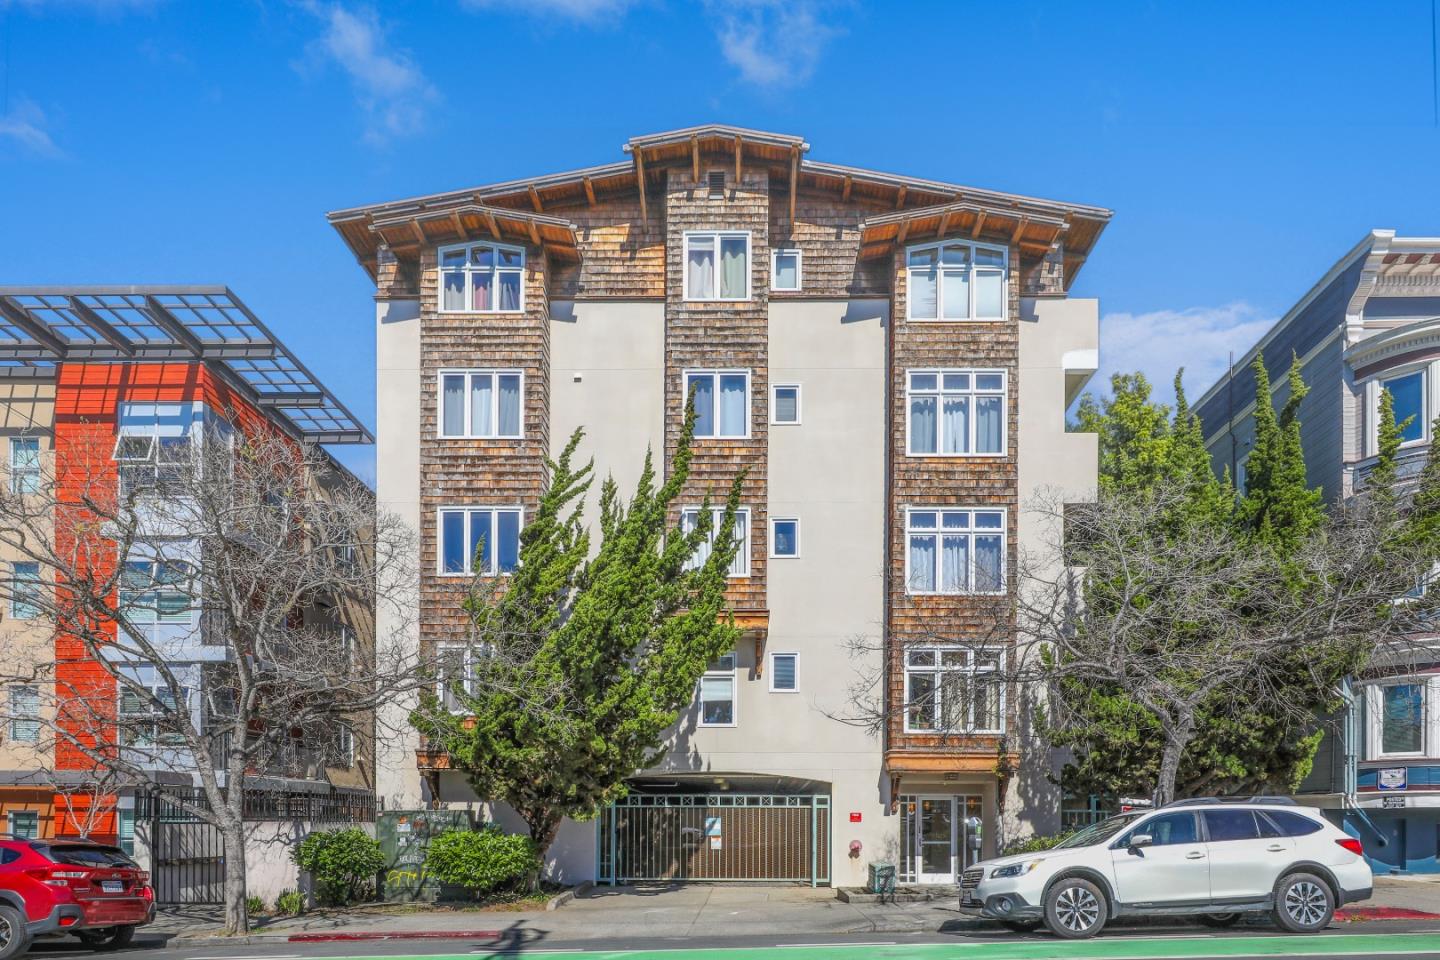 Photo of 2029 Channing Wy #3C in Berkeley, CA